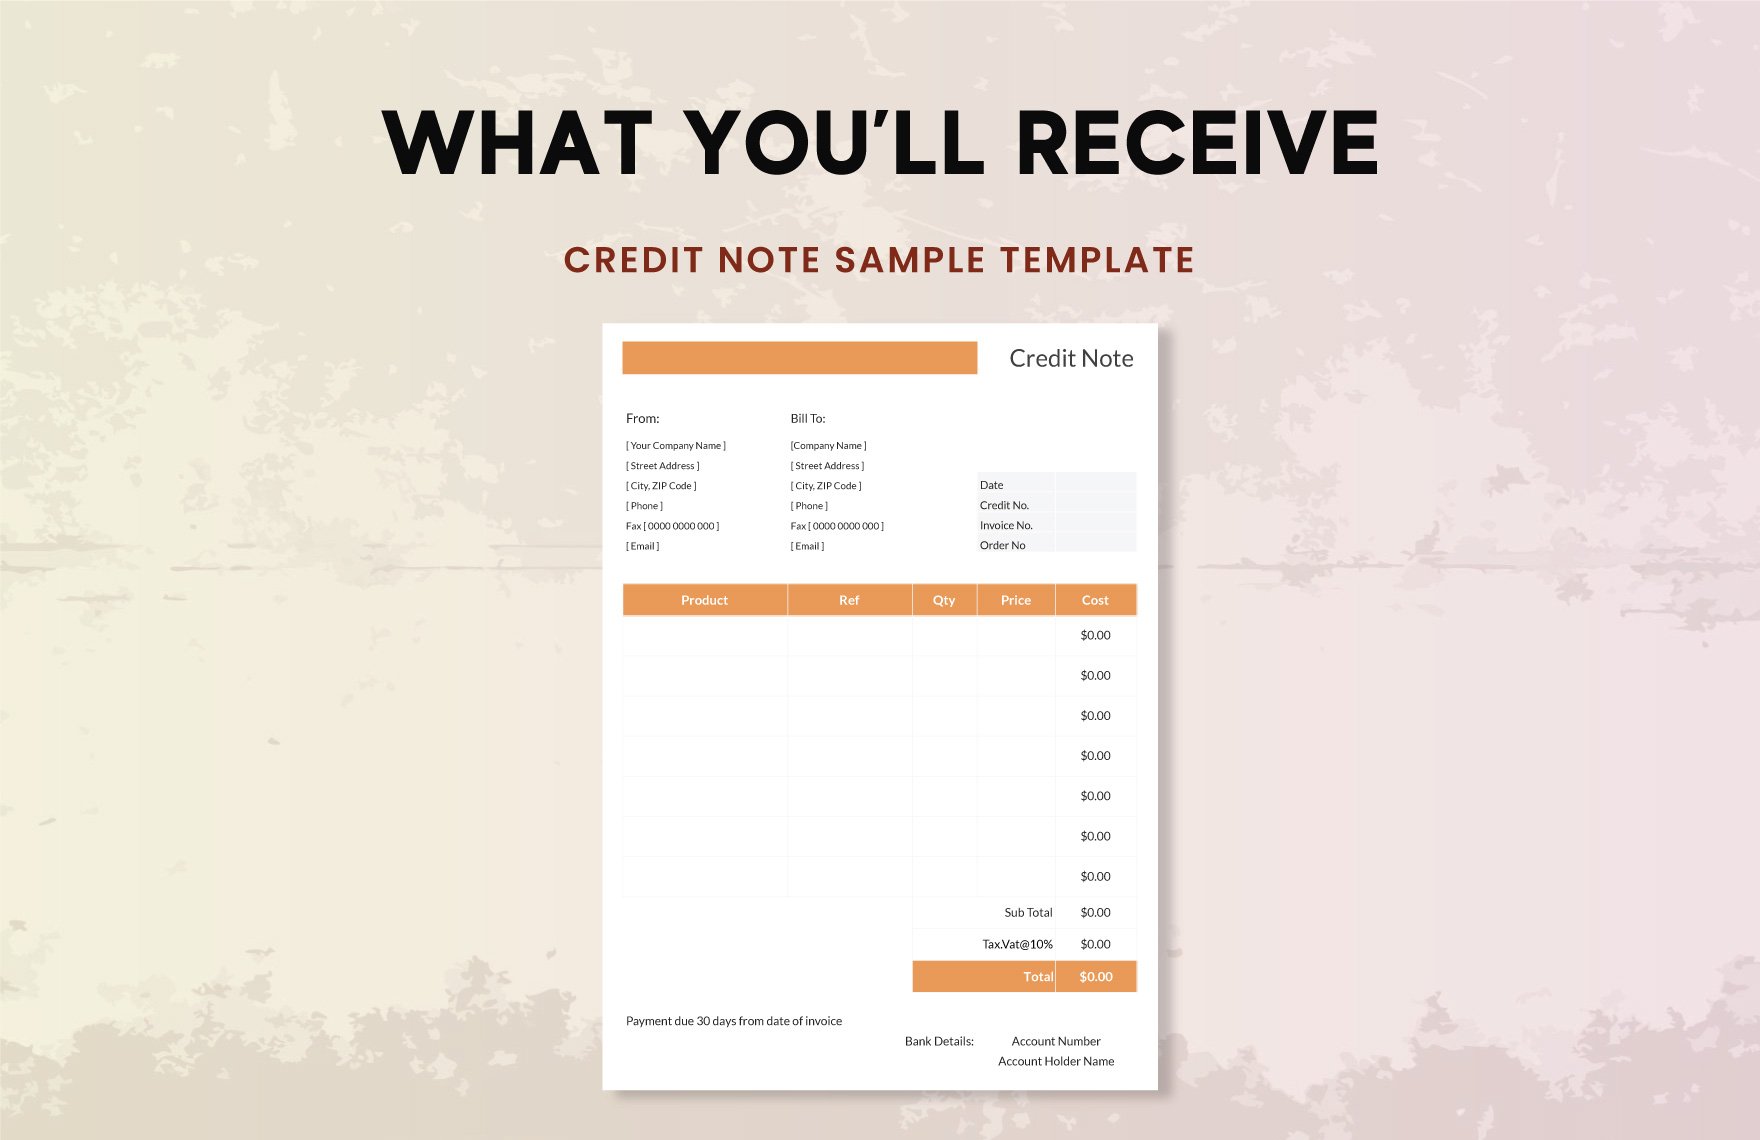 Credit Note sample Template